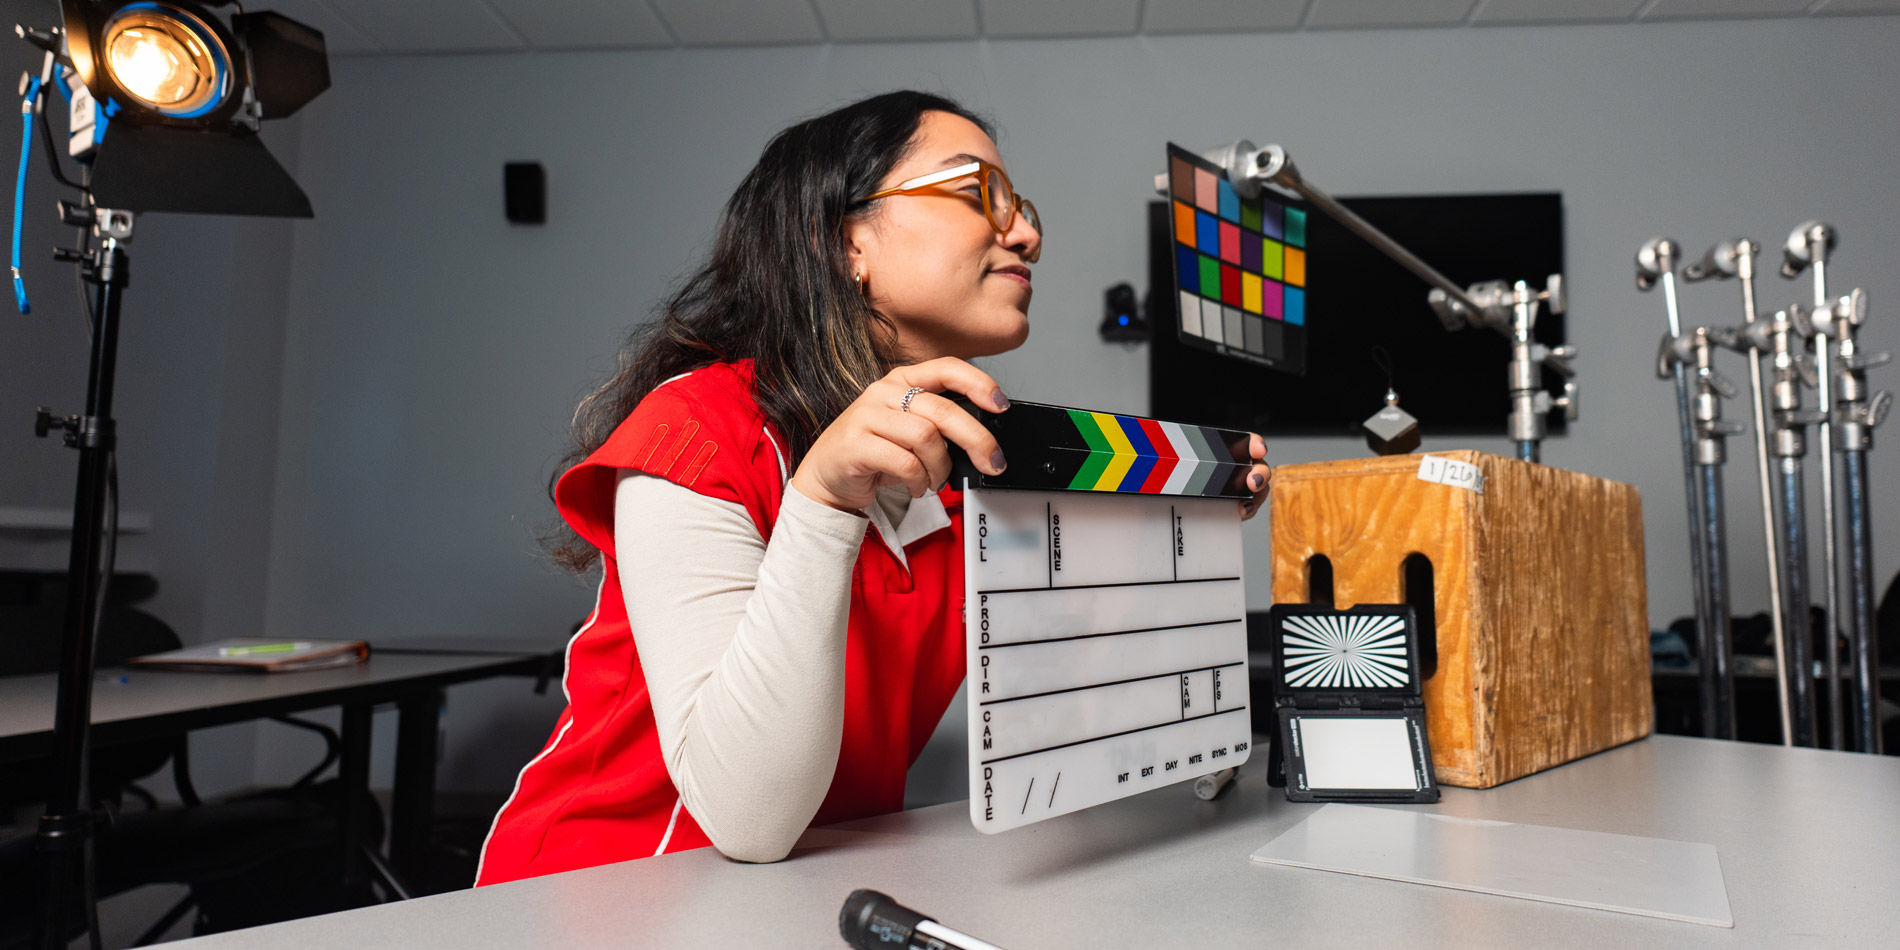 Student learning about color and lighting in film, holding a clapper board.